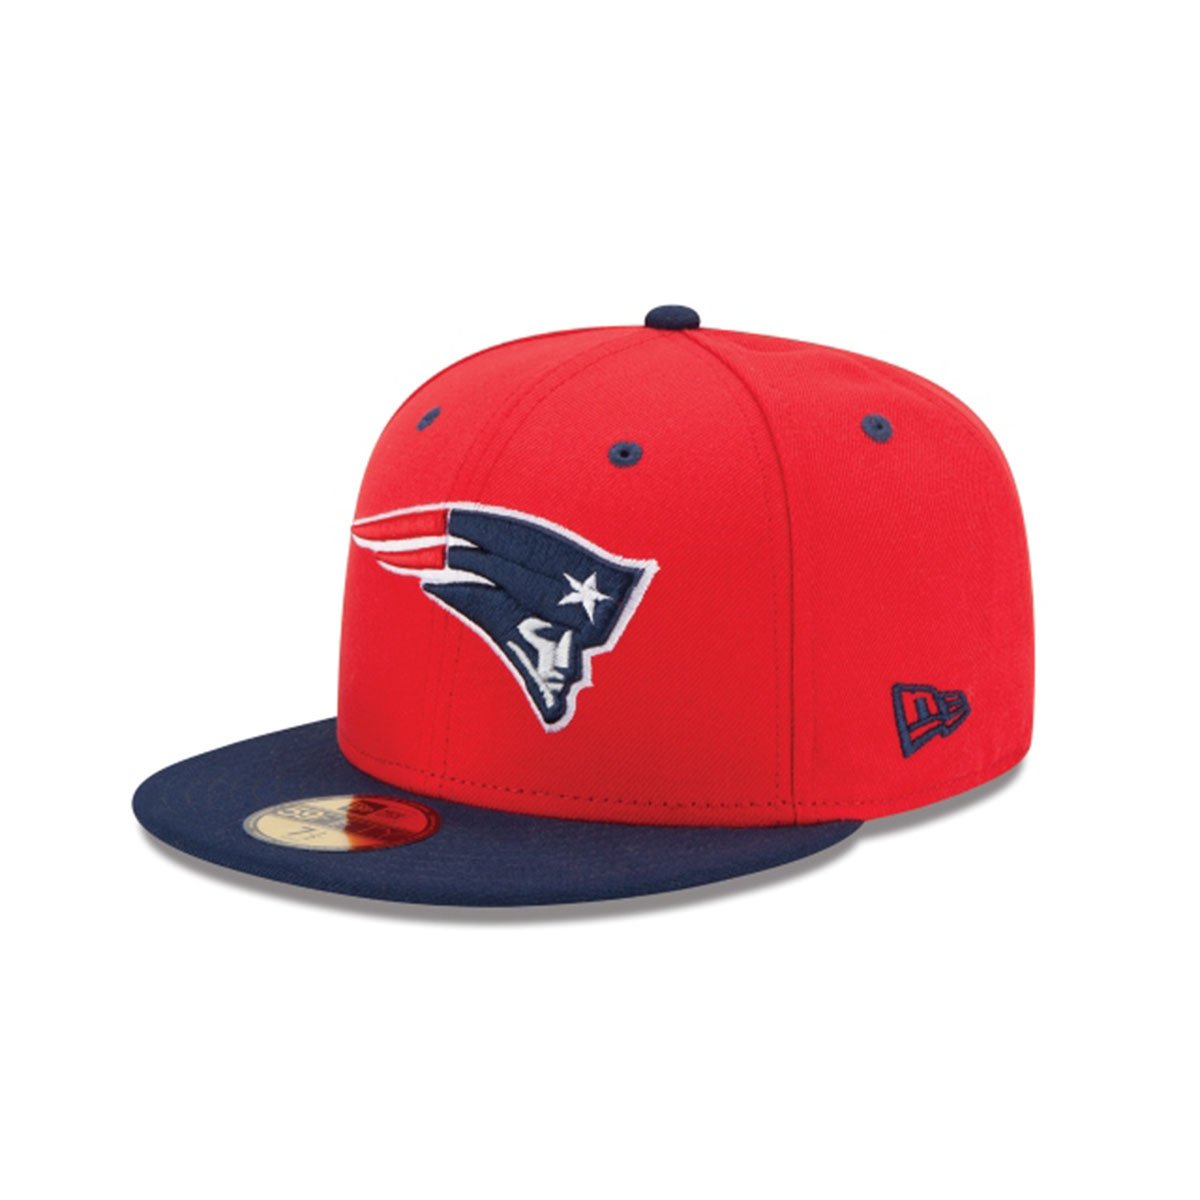 NEW ENGLAND PATRIOTS 2TONE 59FIFTY FITTED RED/NAVY